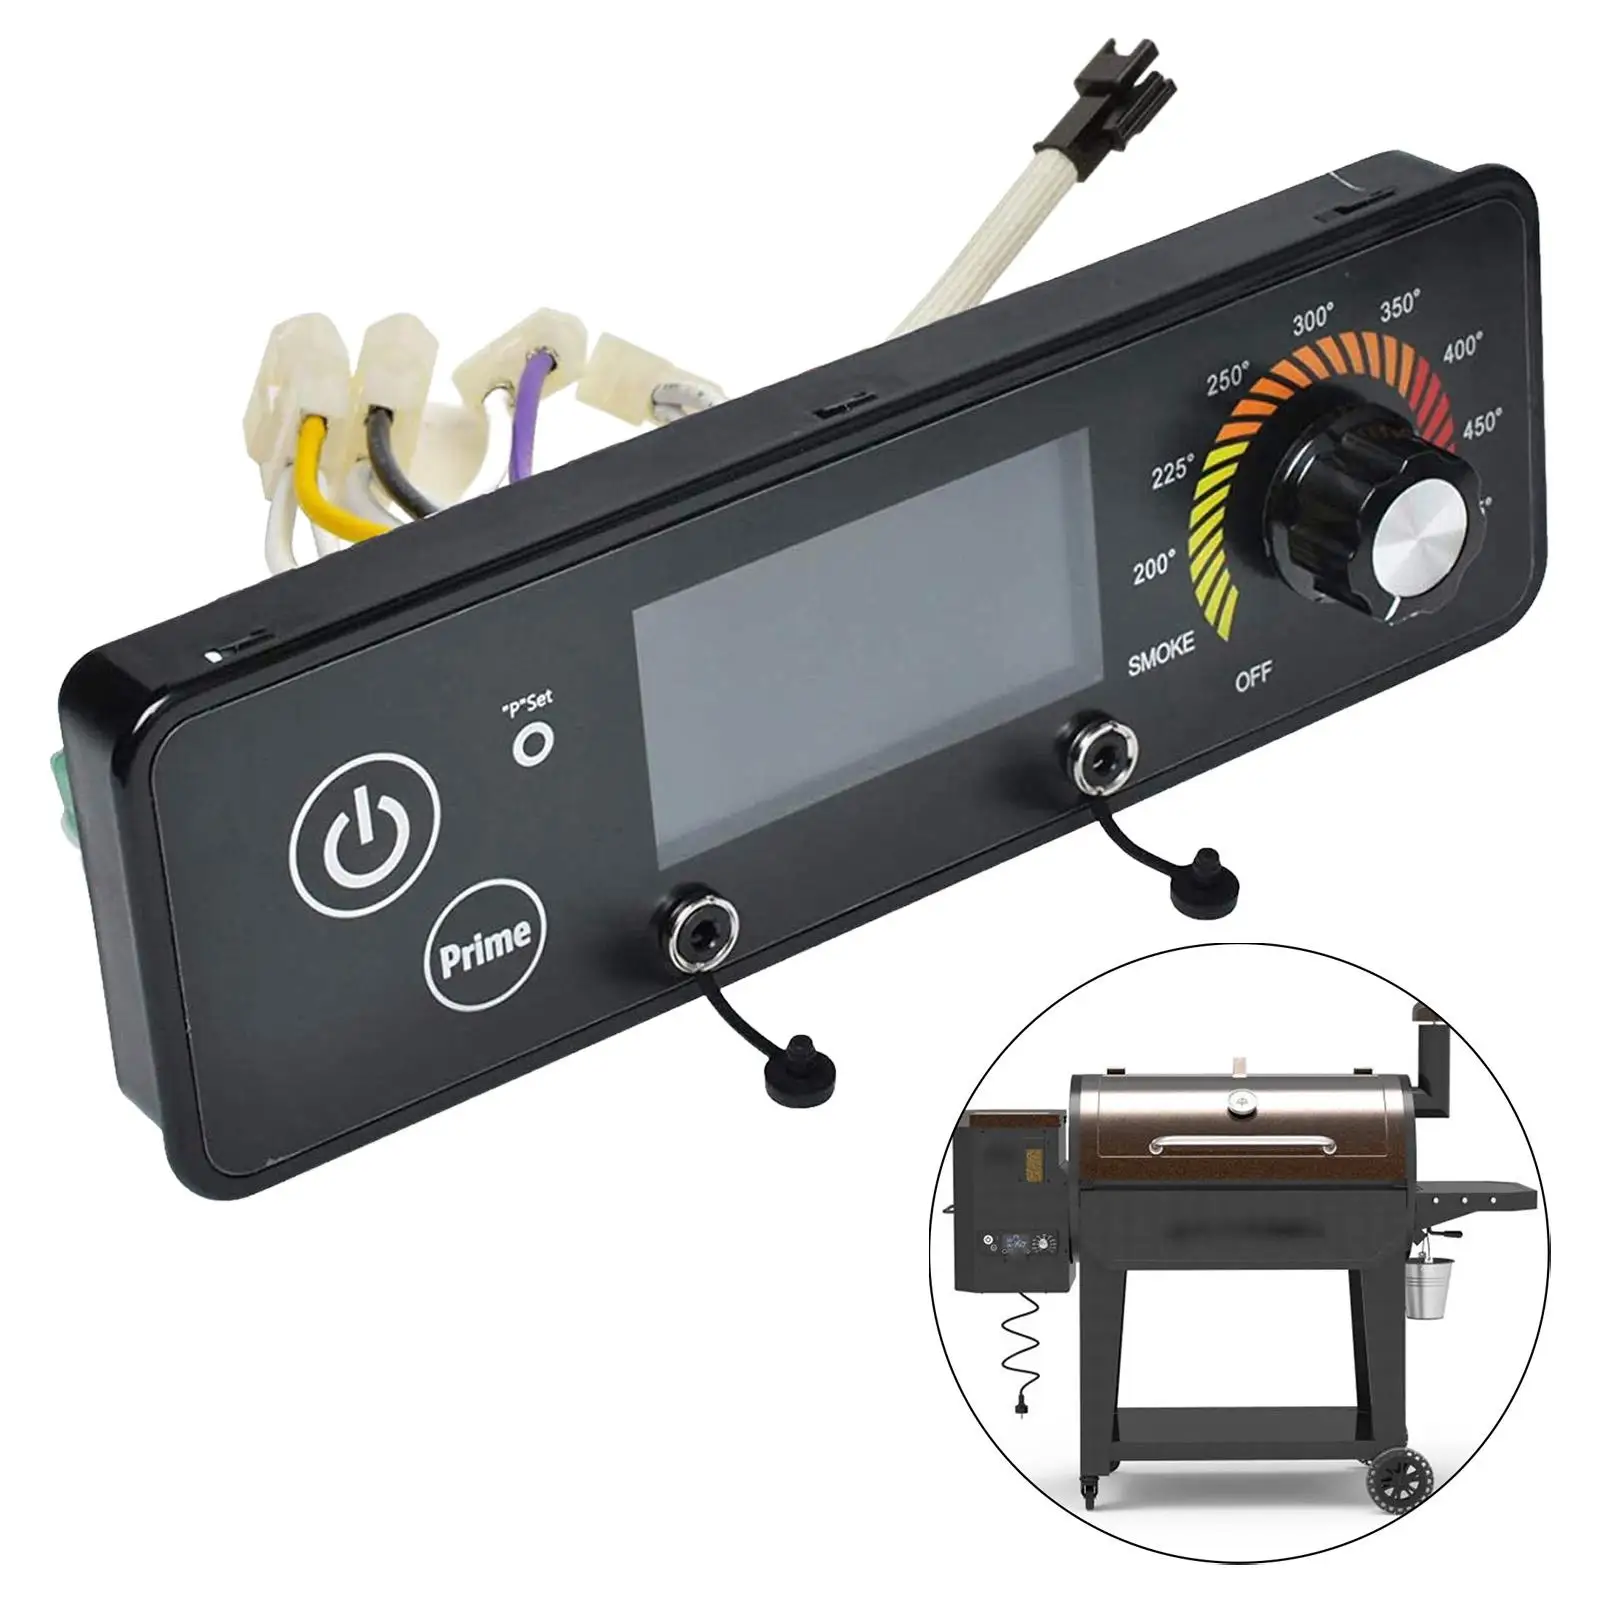 BBQ Digital Replacement Protable W/ LCD Display Temperature Controller Replacement for Oven BBQ Accessories